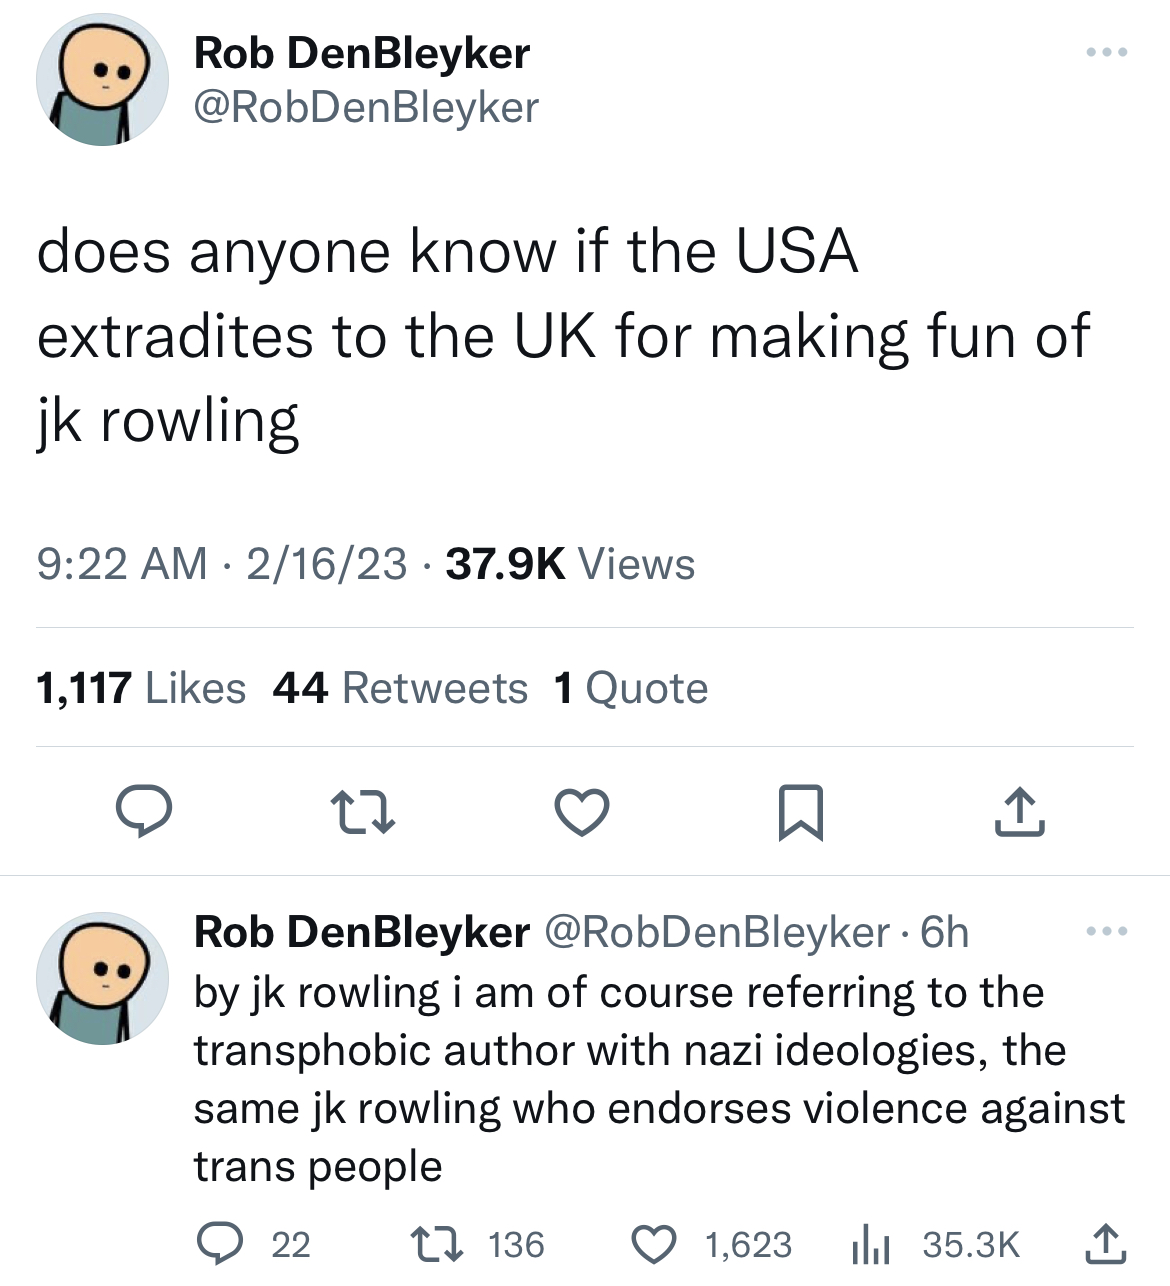 deranged tweets - document - Rob DenBleyker does anyone know if the Usa extradites to the Uk for making fun of jk rowling 21623 Views 1,117 44 1 Quote D Rob DenBleyker 6h by jk rowling i am of course referring to the transphobic author with nazi ideologie